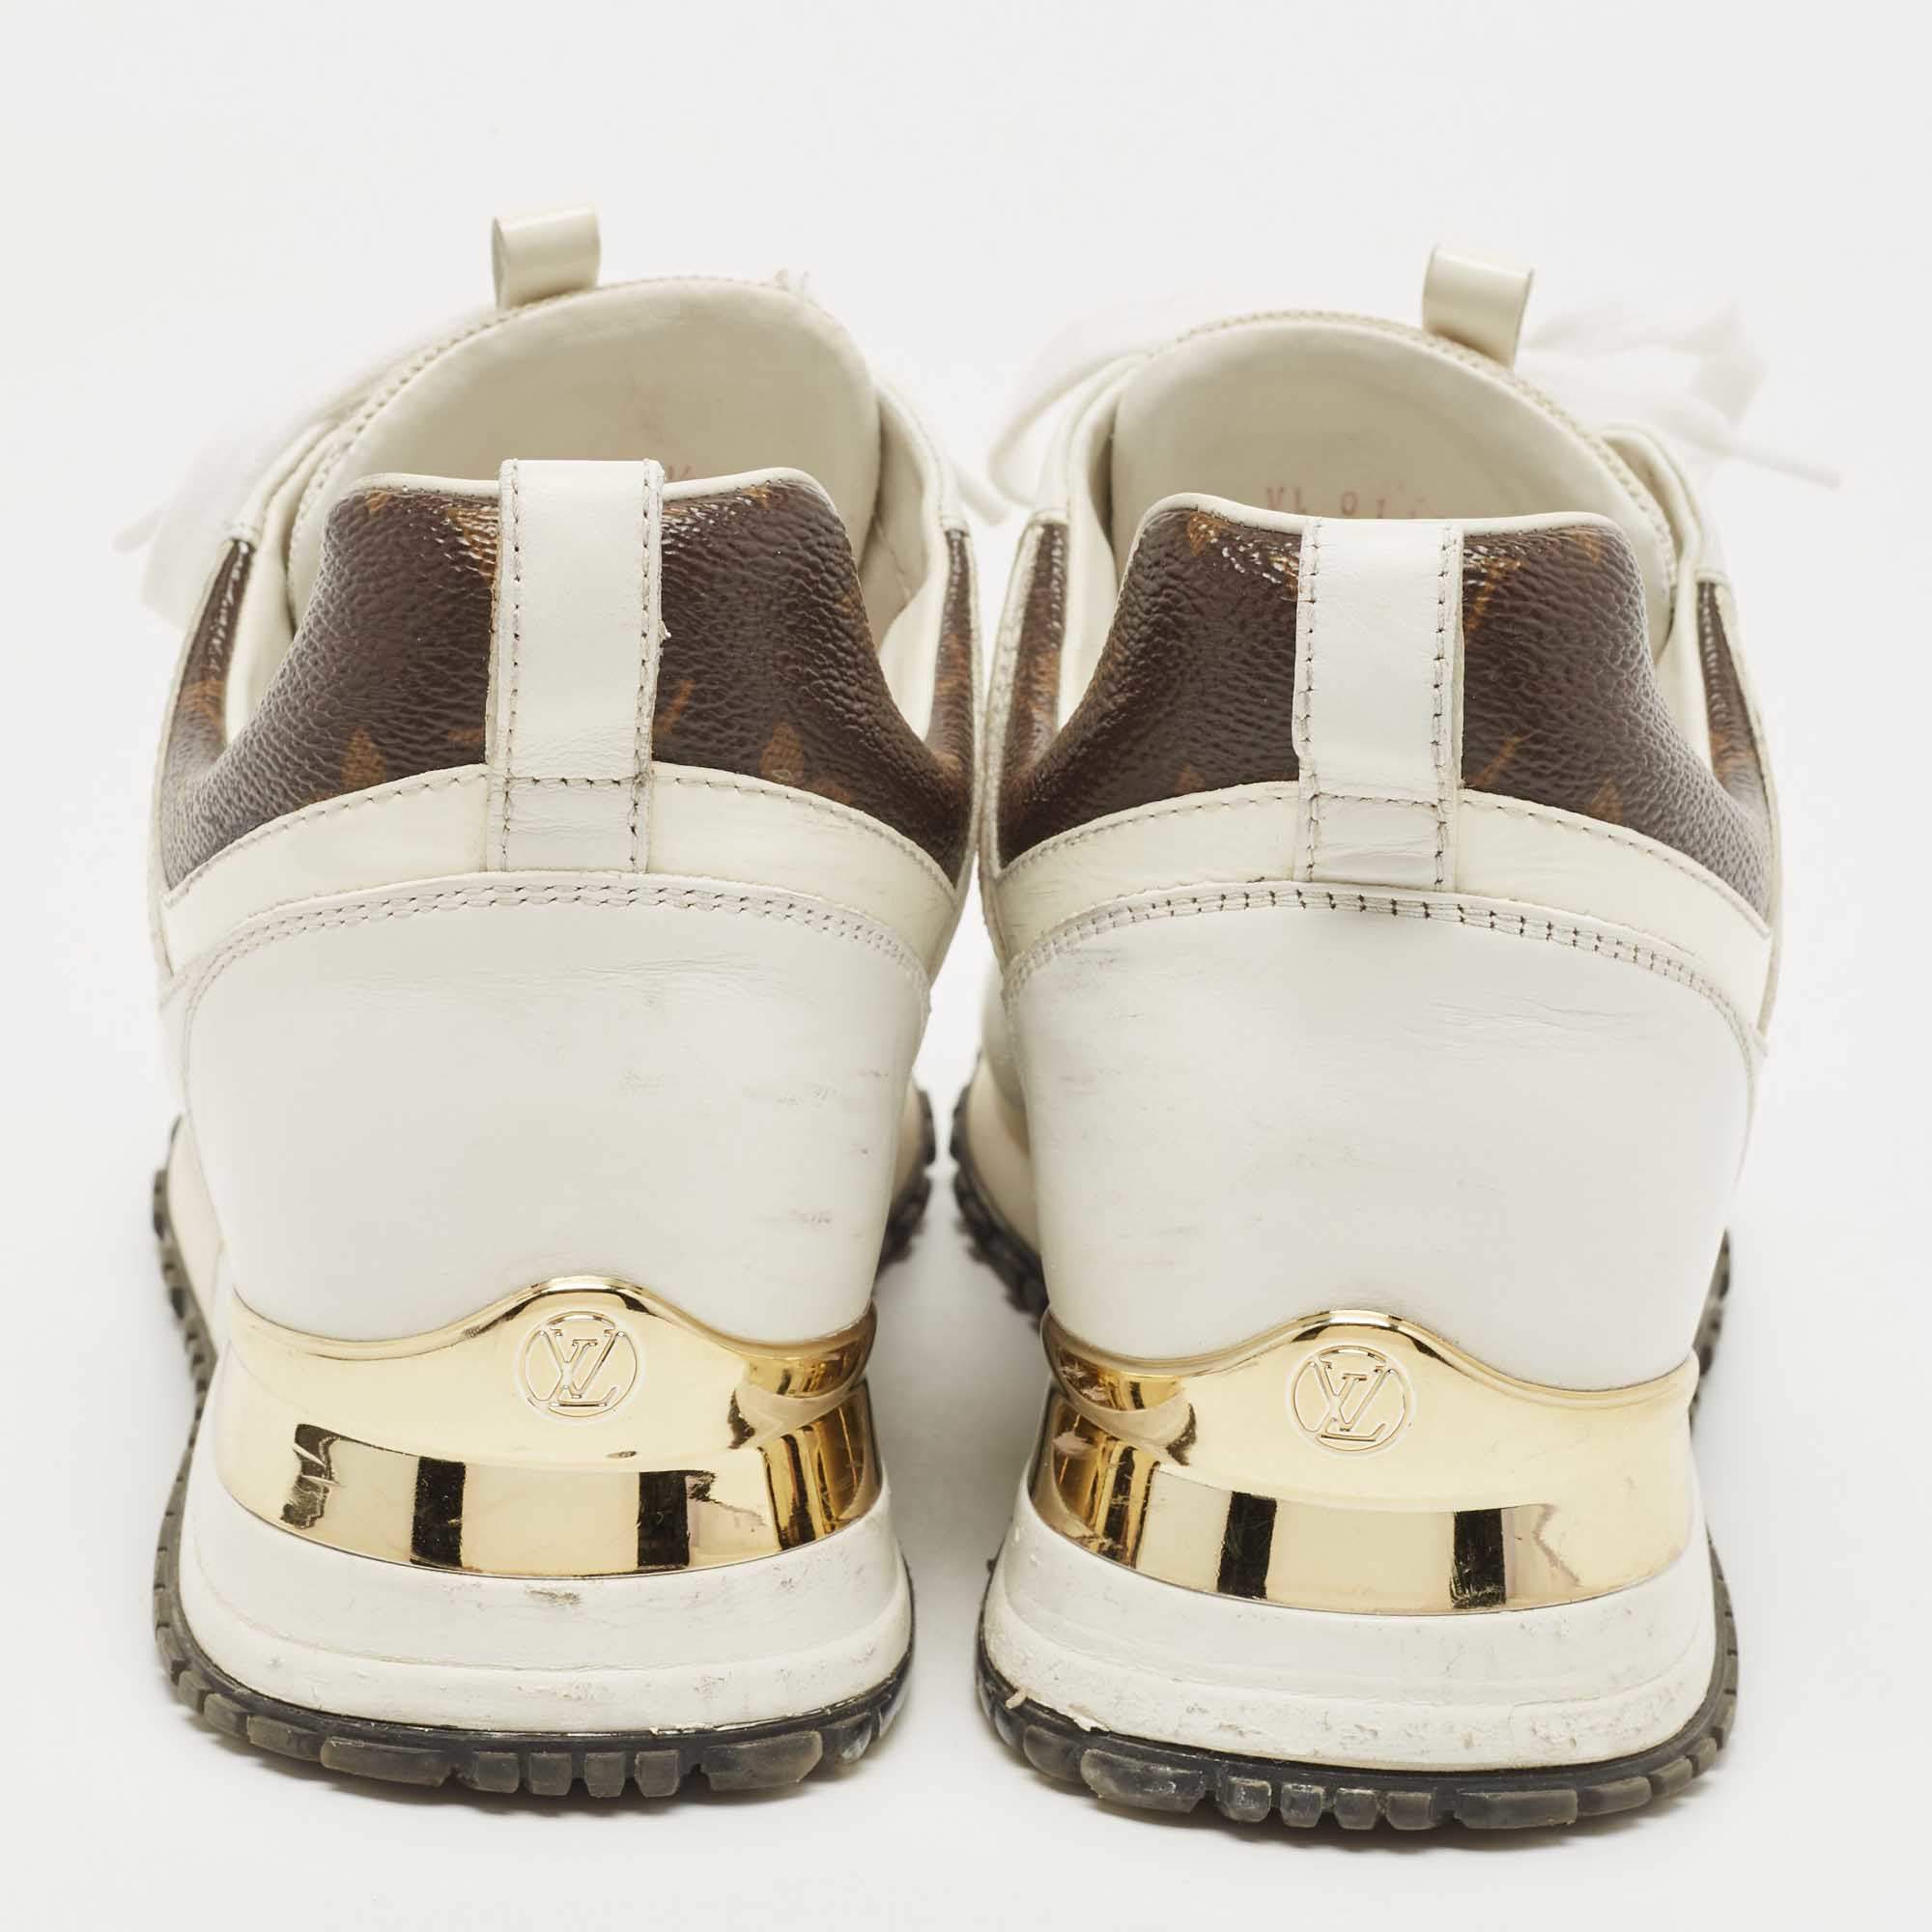 Run away leather trainers Louis Vuitton White size 37.5 EU in Leather -  29365448